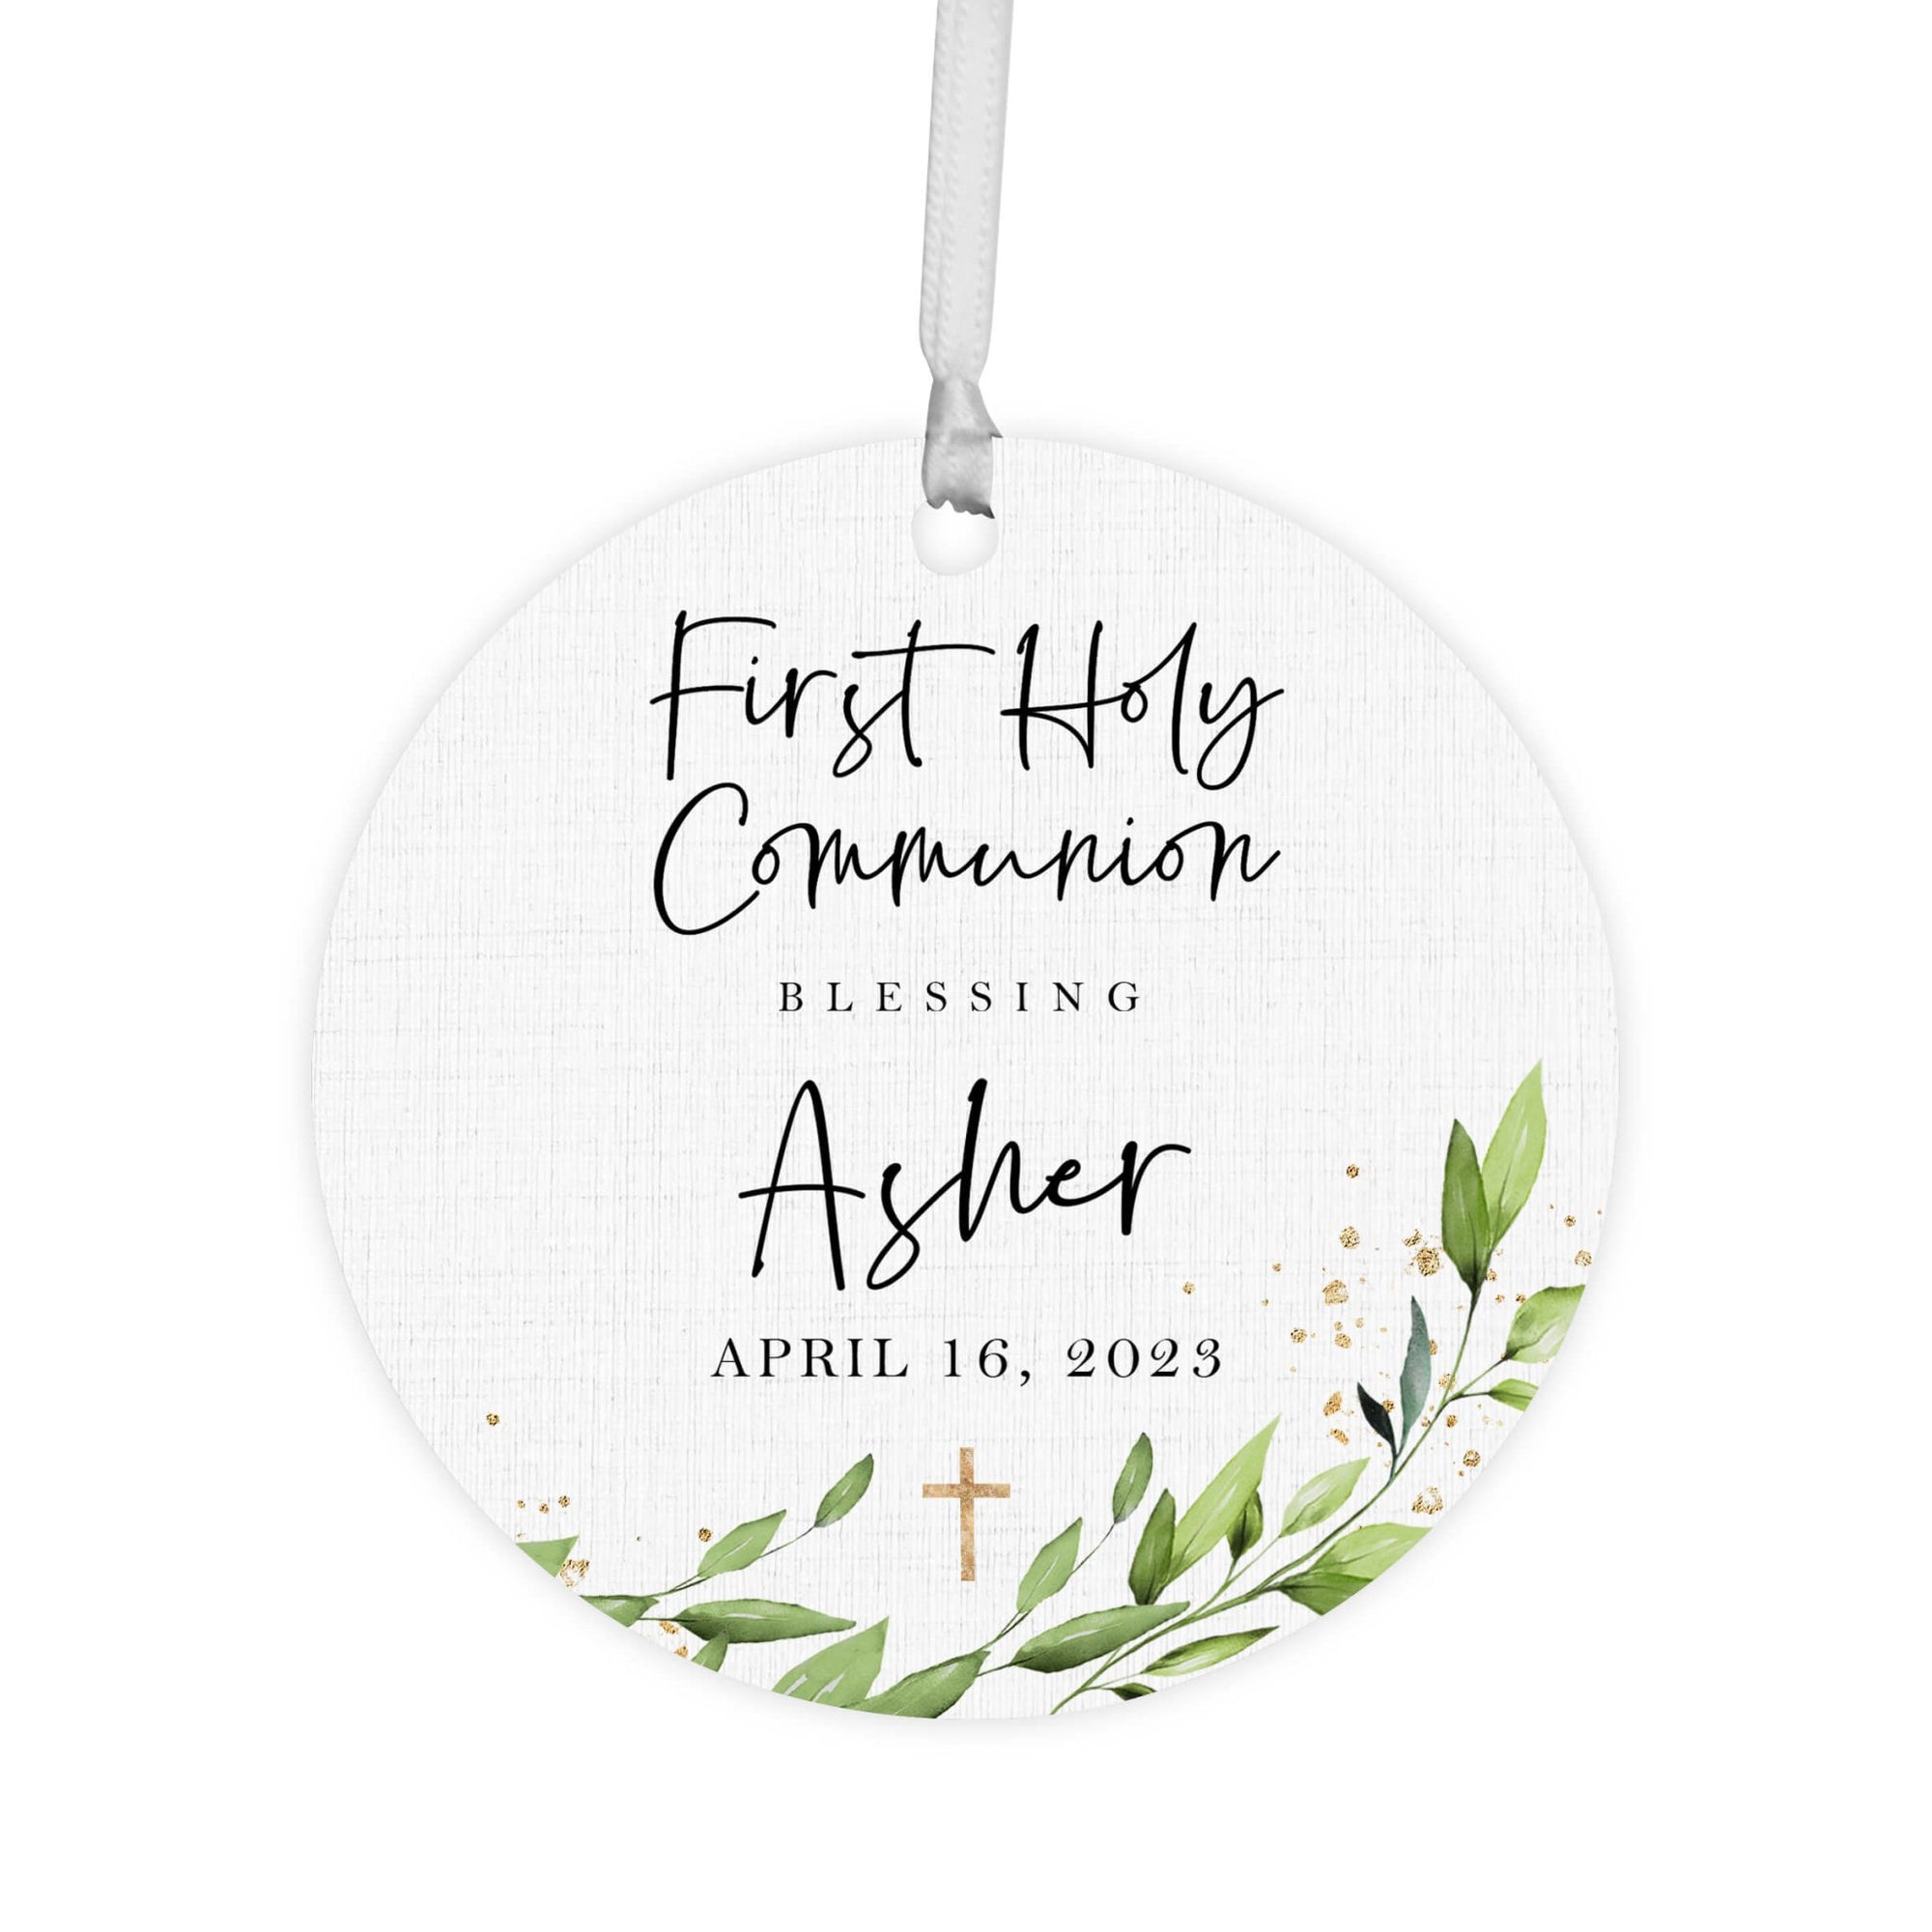 Personalized Holy Communion Wooden Ornament - May The Grace - LifeSong Milestones